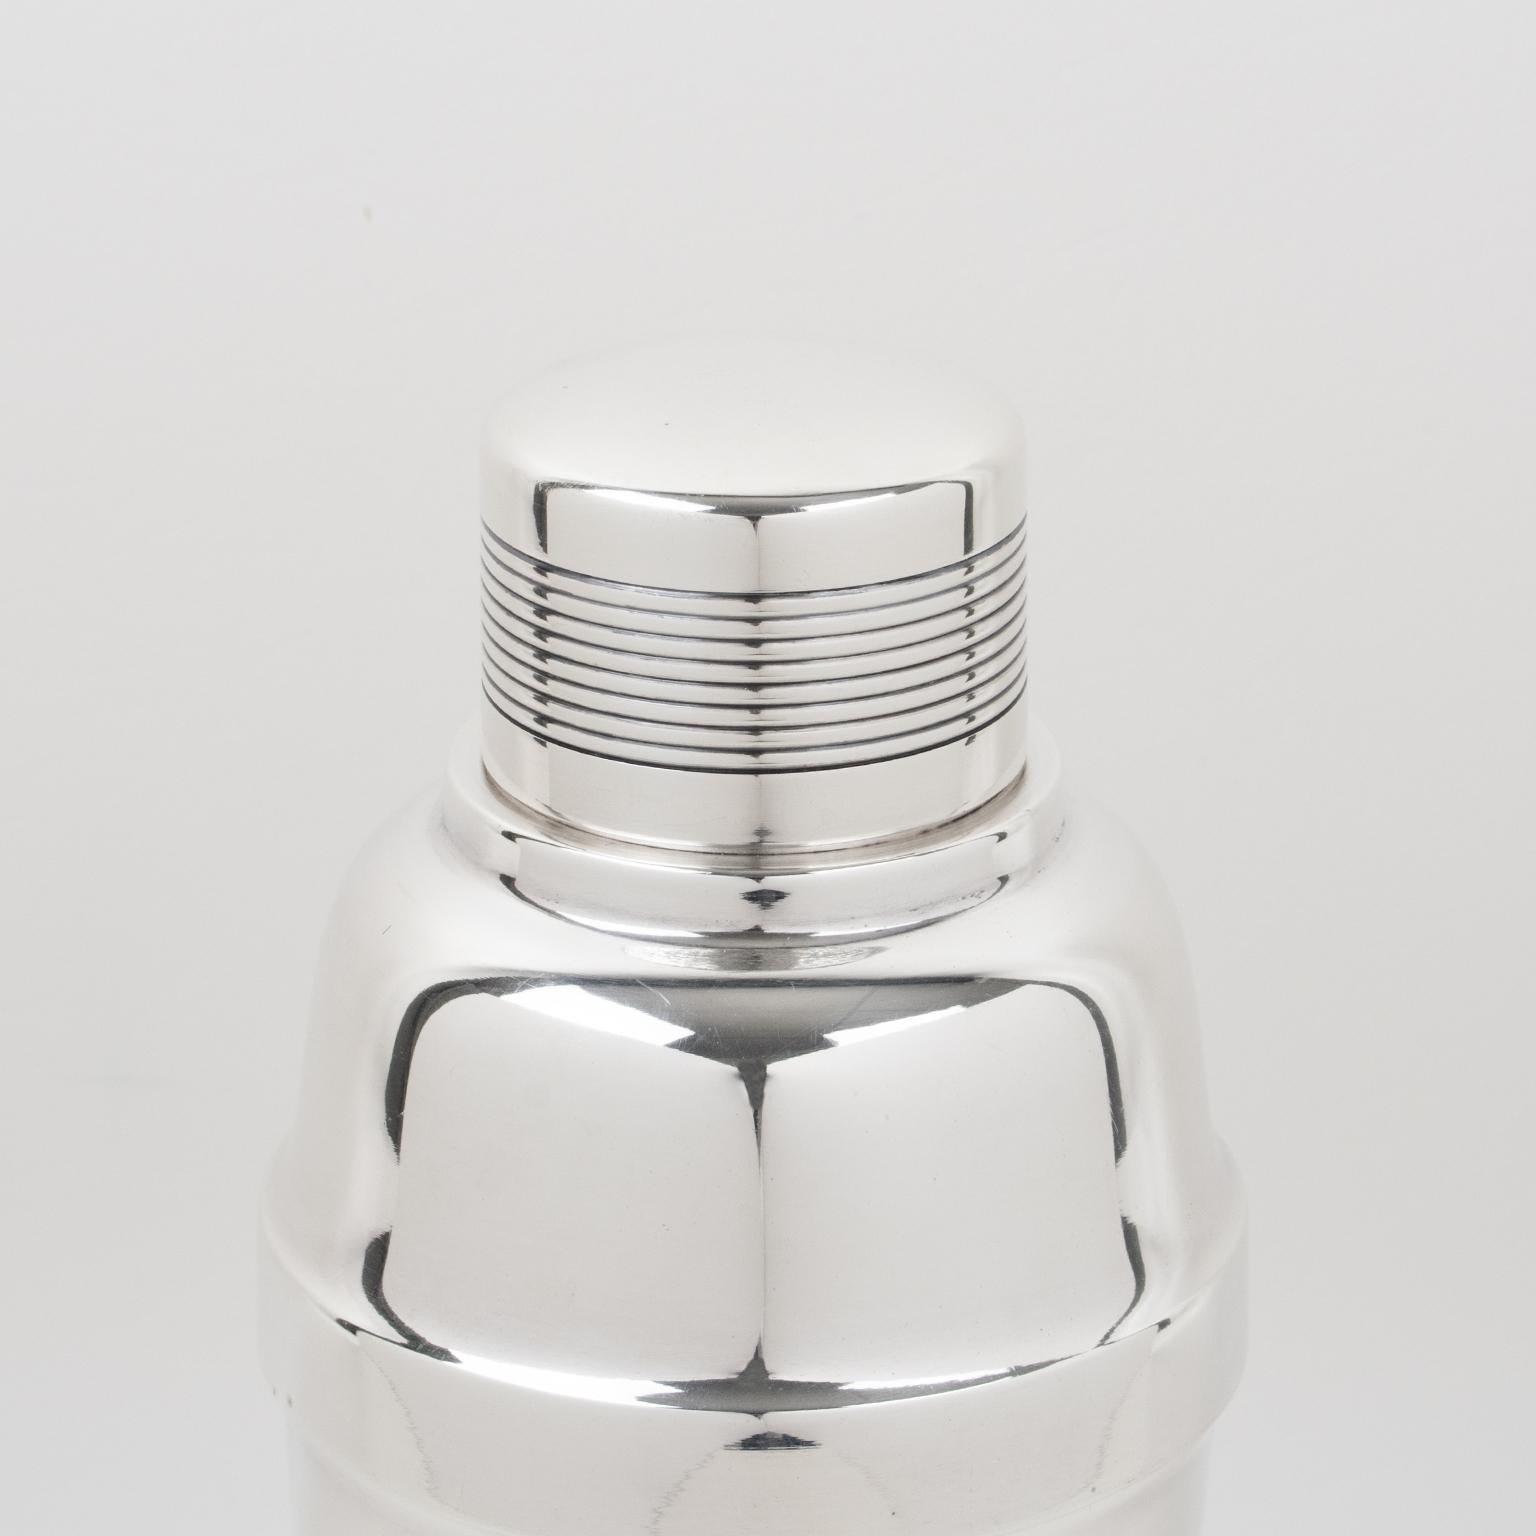 French Art Deco Silver Plate Cocktail Shaker by Ercuis, Paris 1